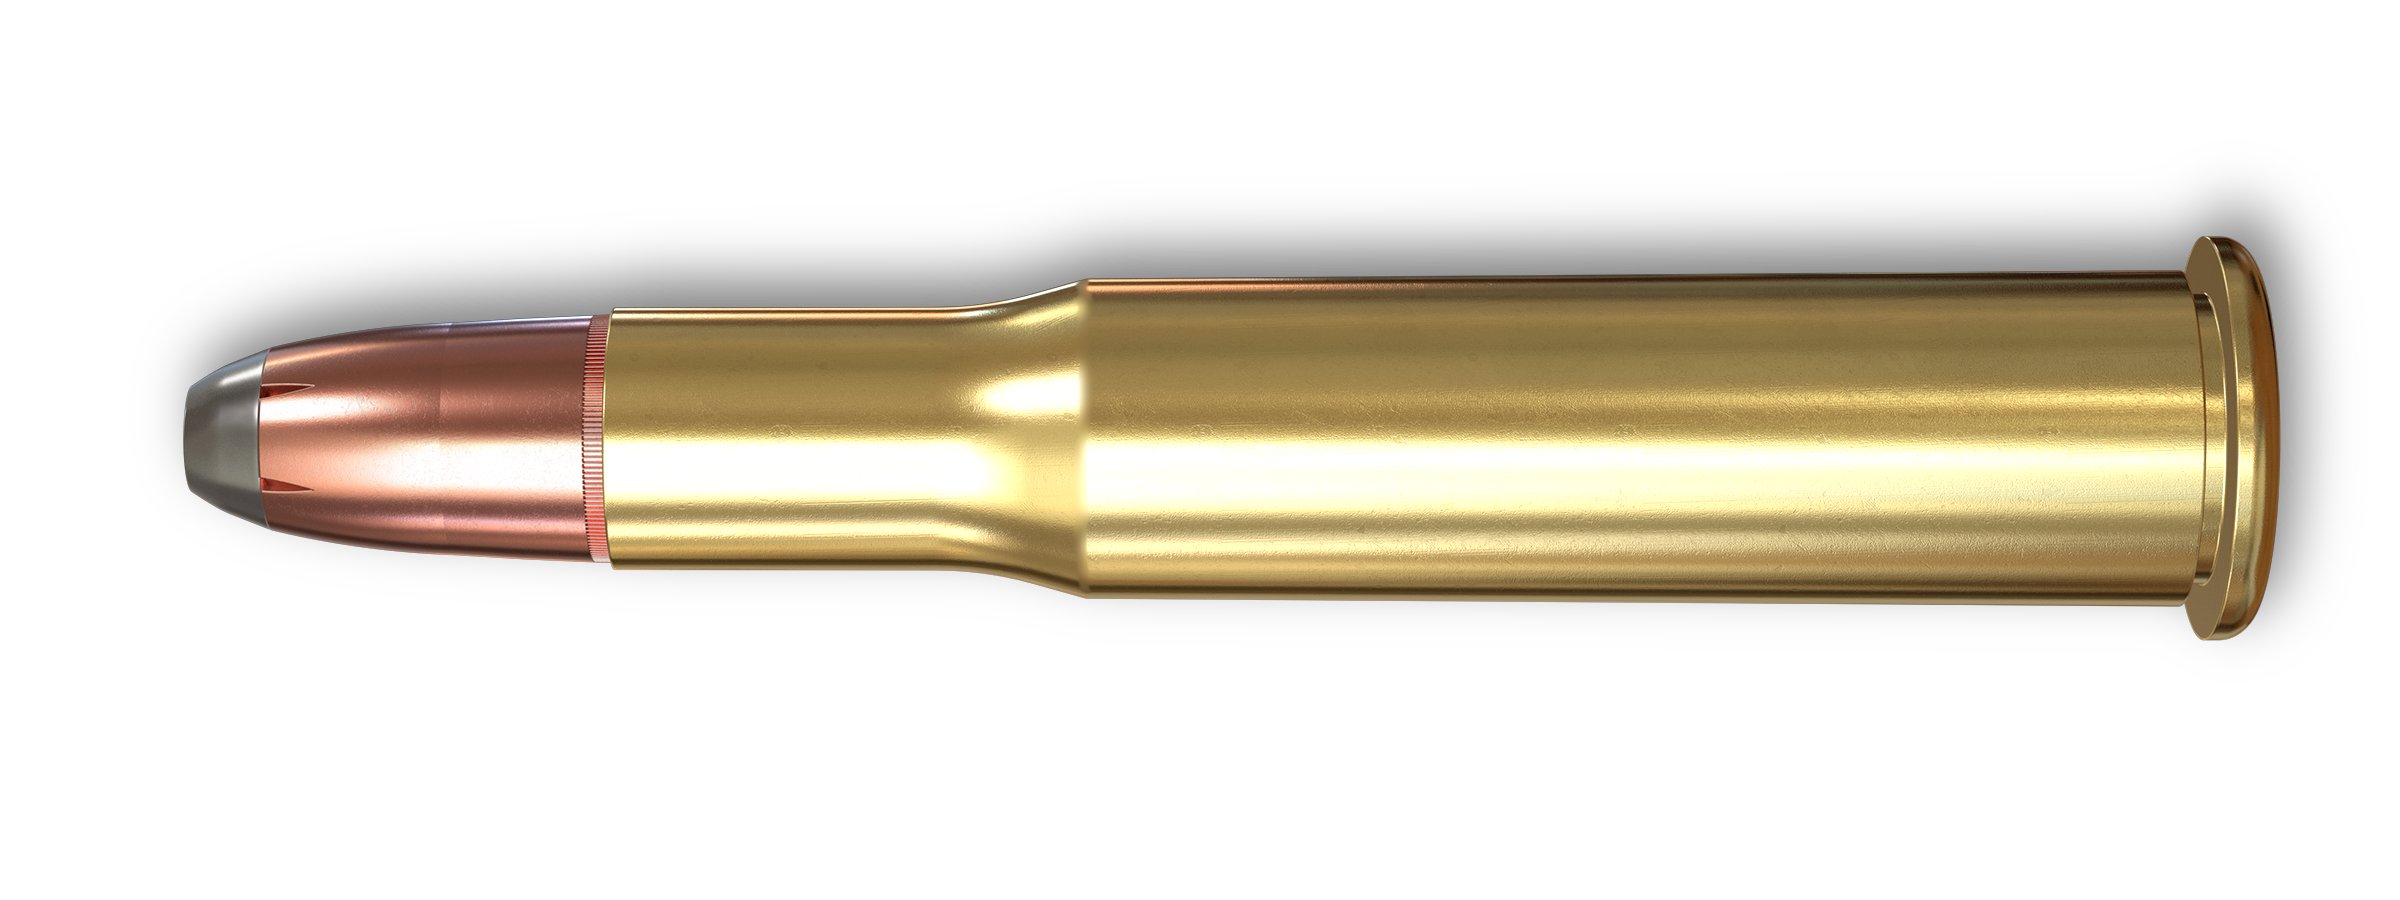 30-30 Winchester, 170 Grain Features